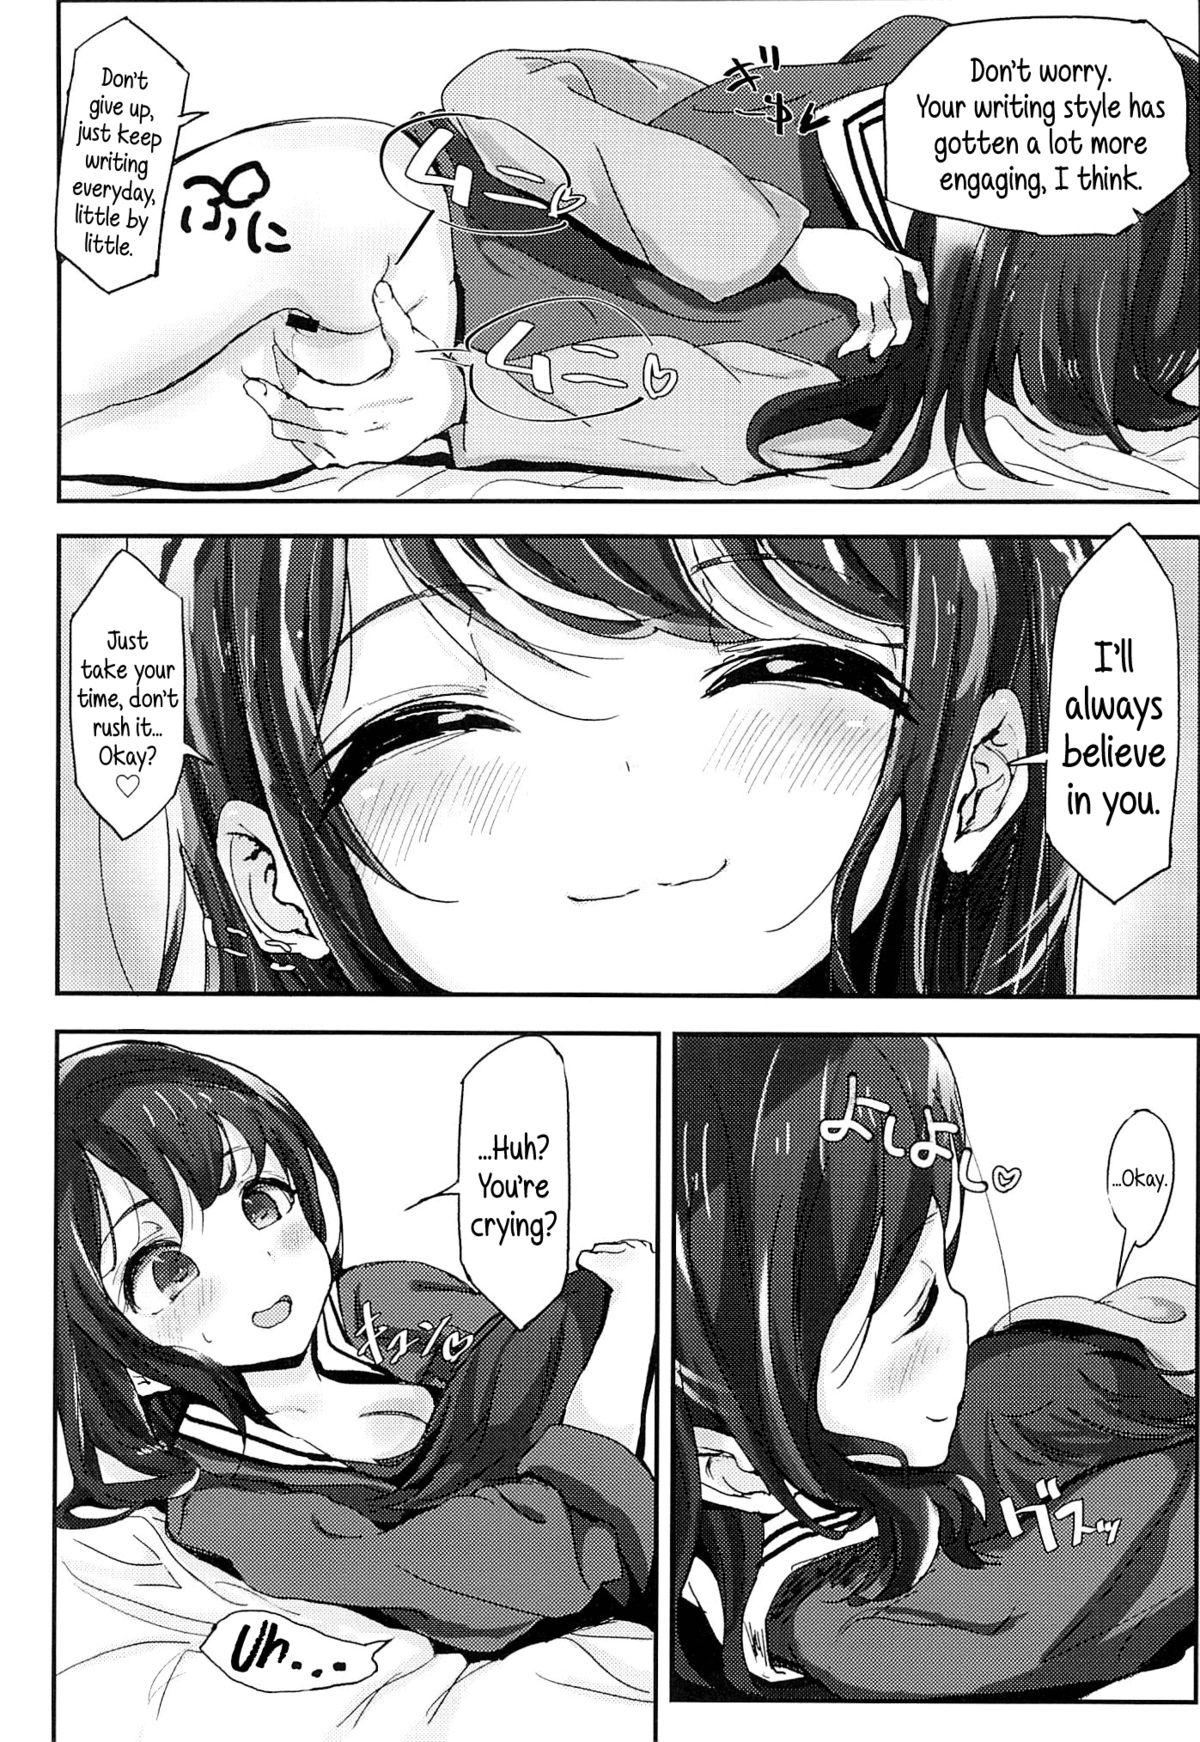 Freckles Shikyuukou no Kanata, Onii chan no Hate | Beyond the mouth of the uterus lies Onii-chan’s demise Rope - Page 11